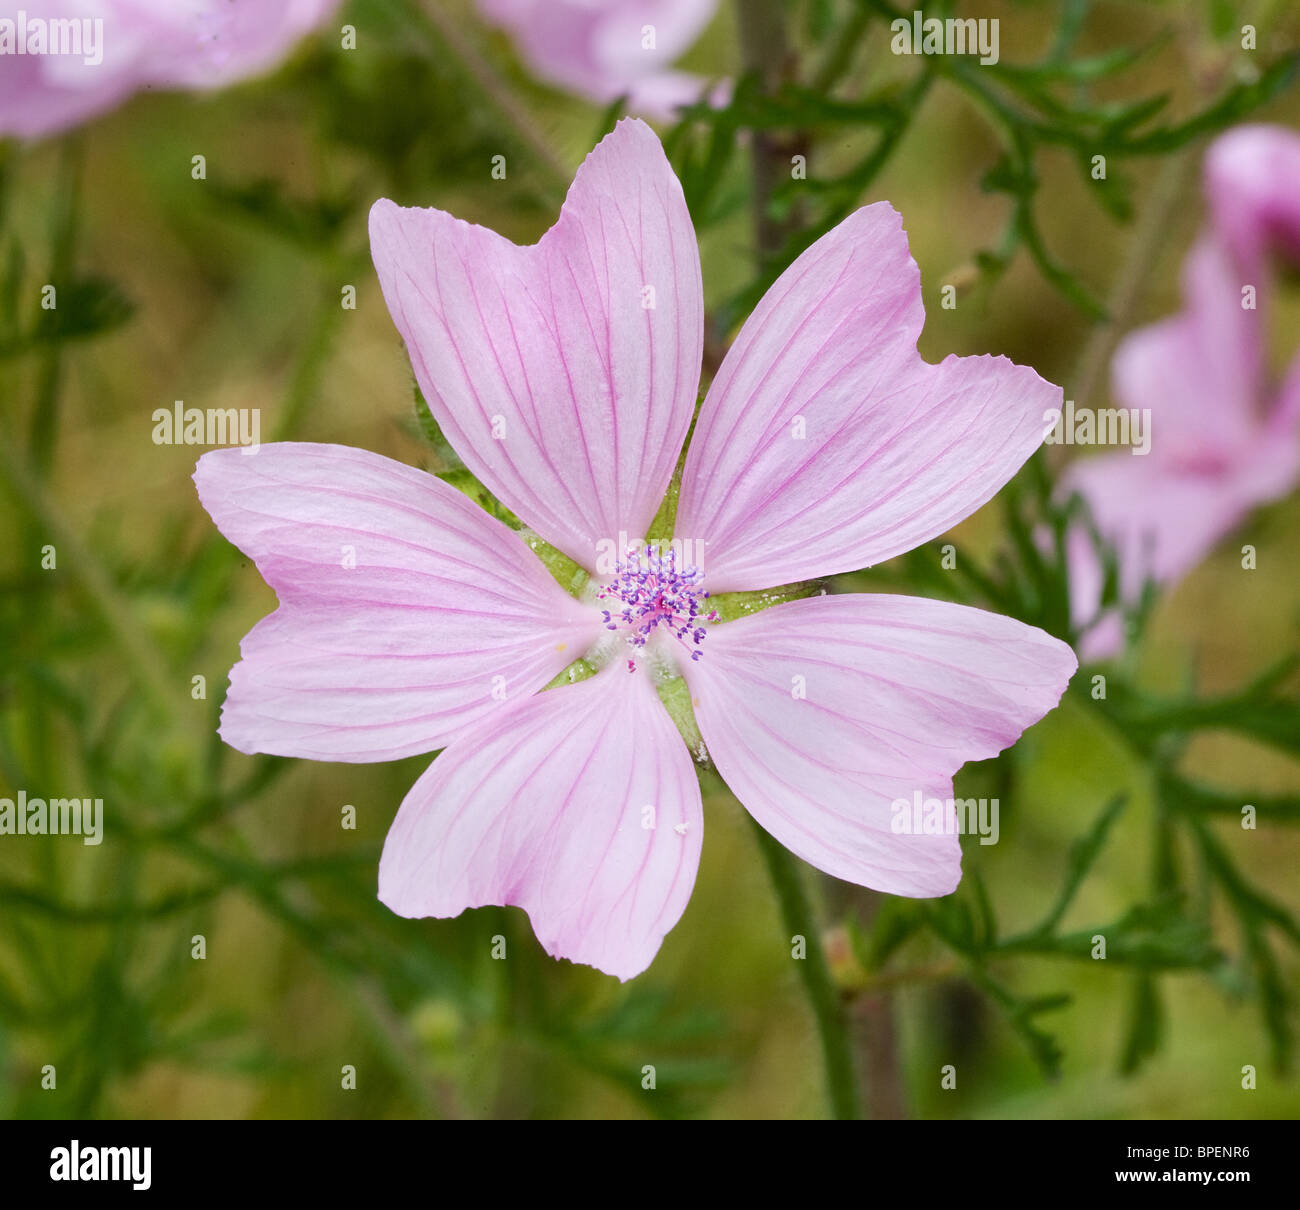 Single flower of Musk Mallow Malva moschata showing five petals and finely cut leaves Stock Photo